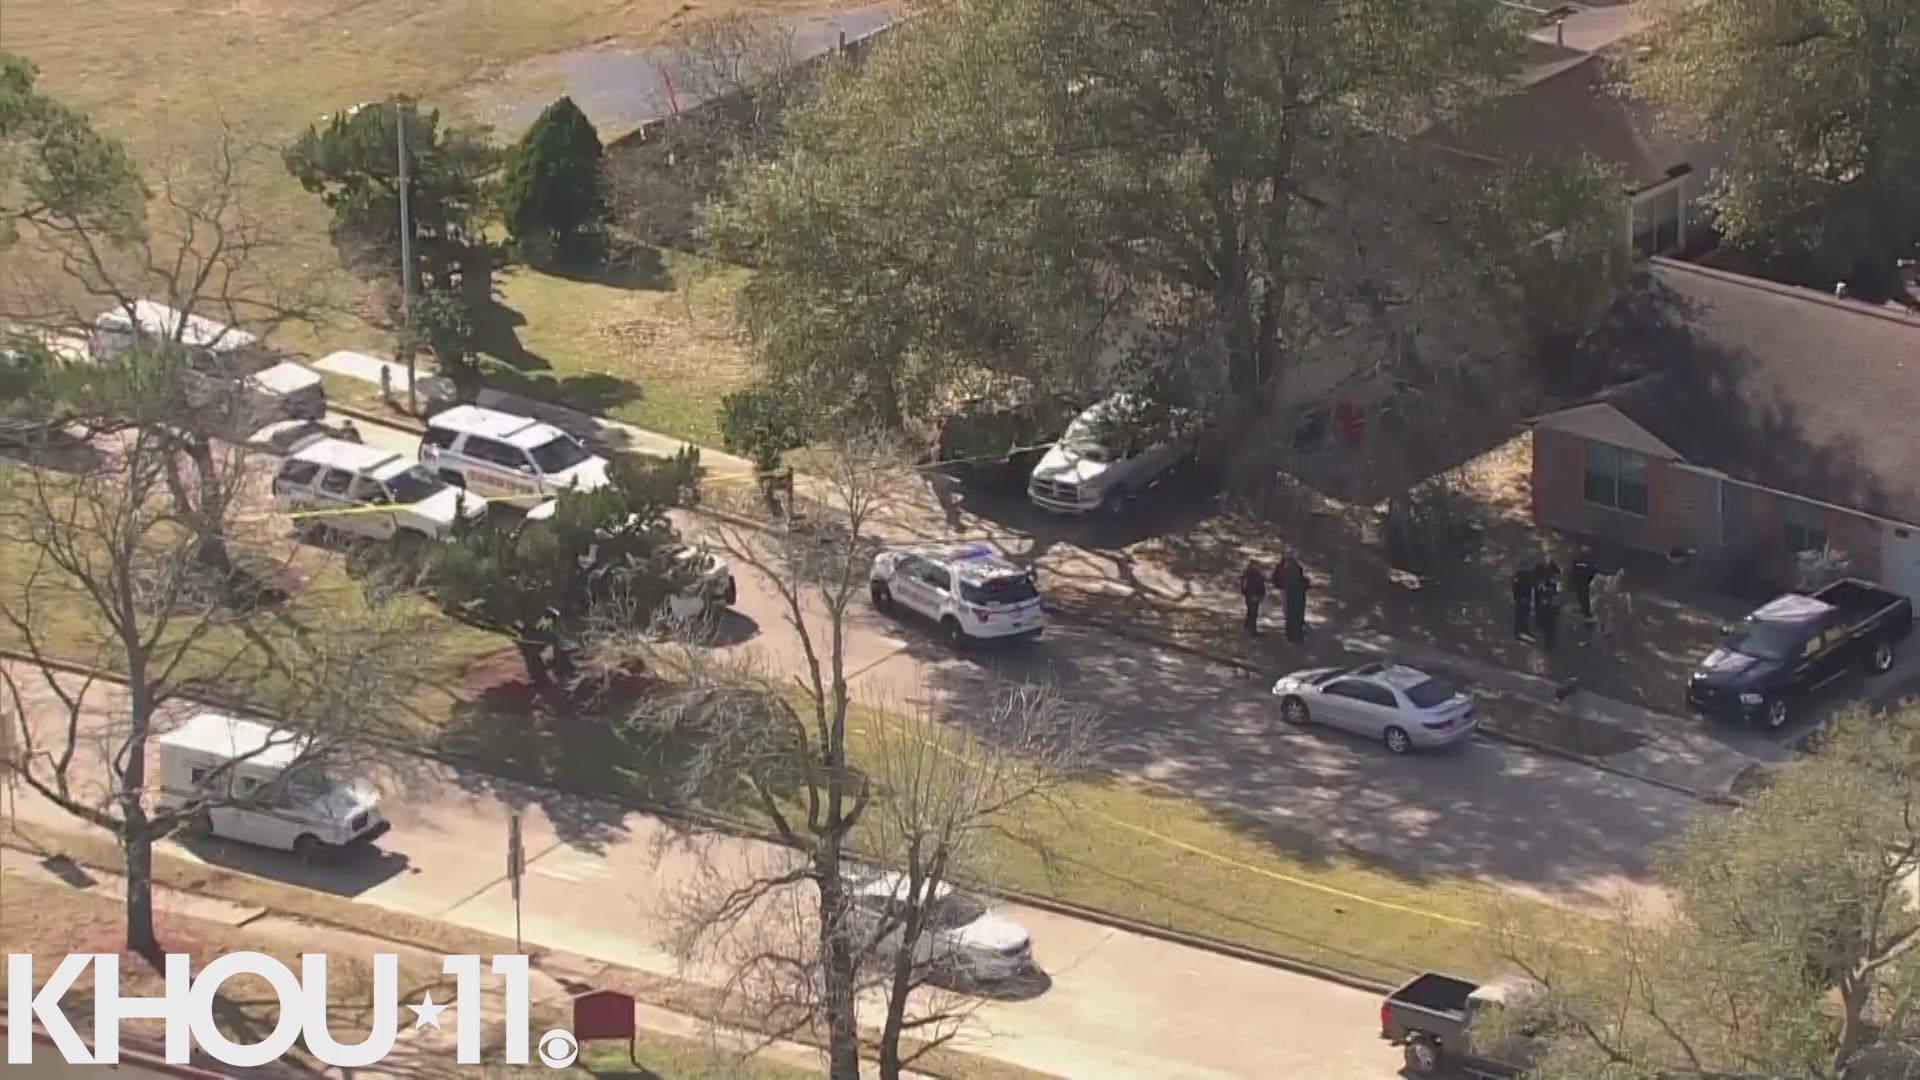 A man was found fatally shot in northeast Harris County Thursday. Here is scene video from Air 11.